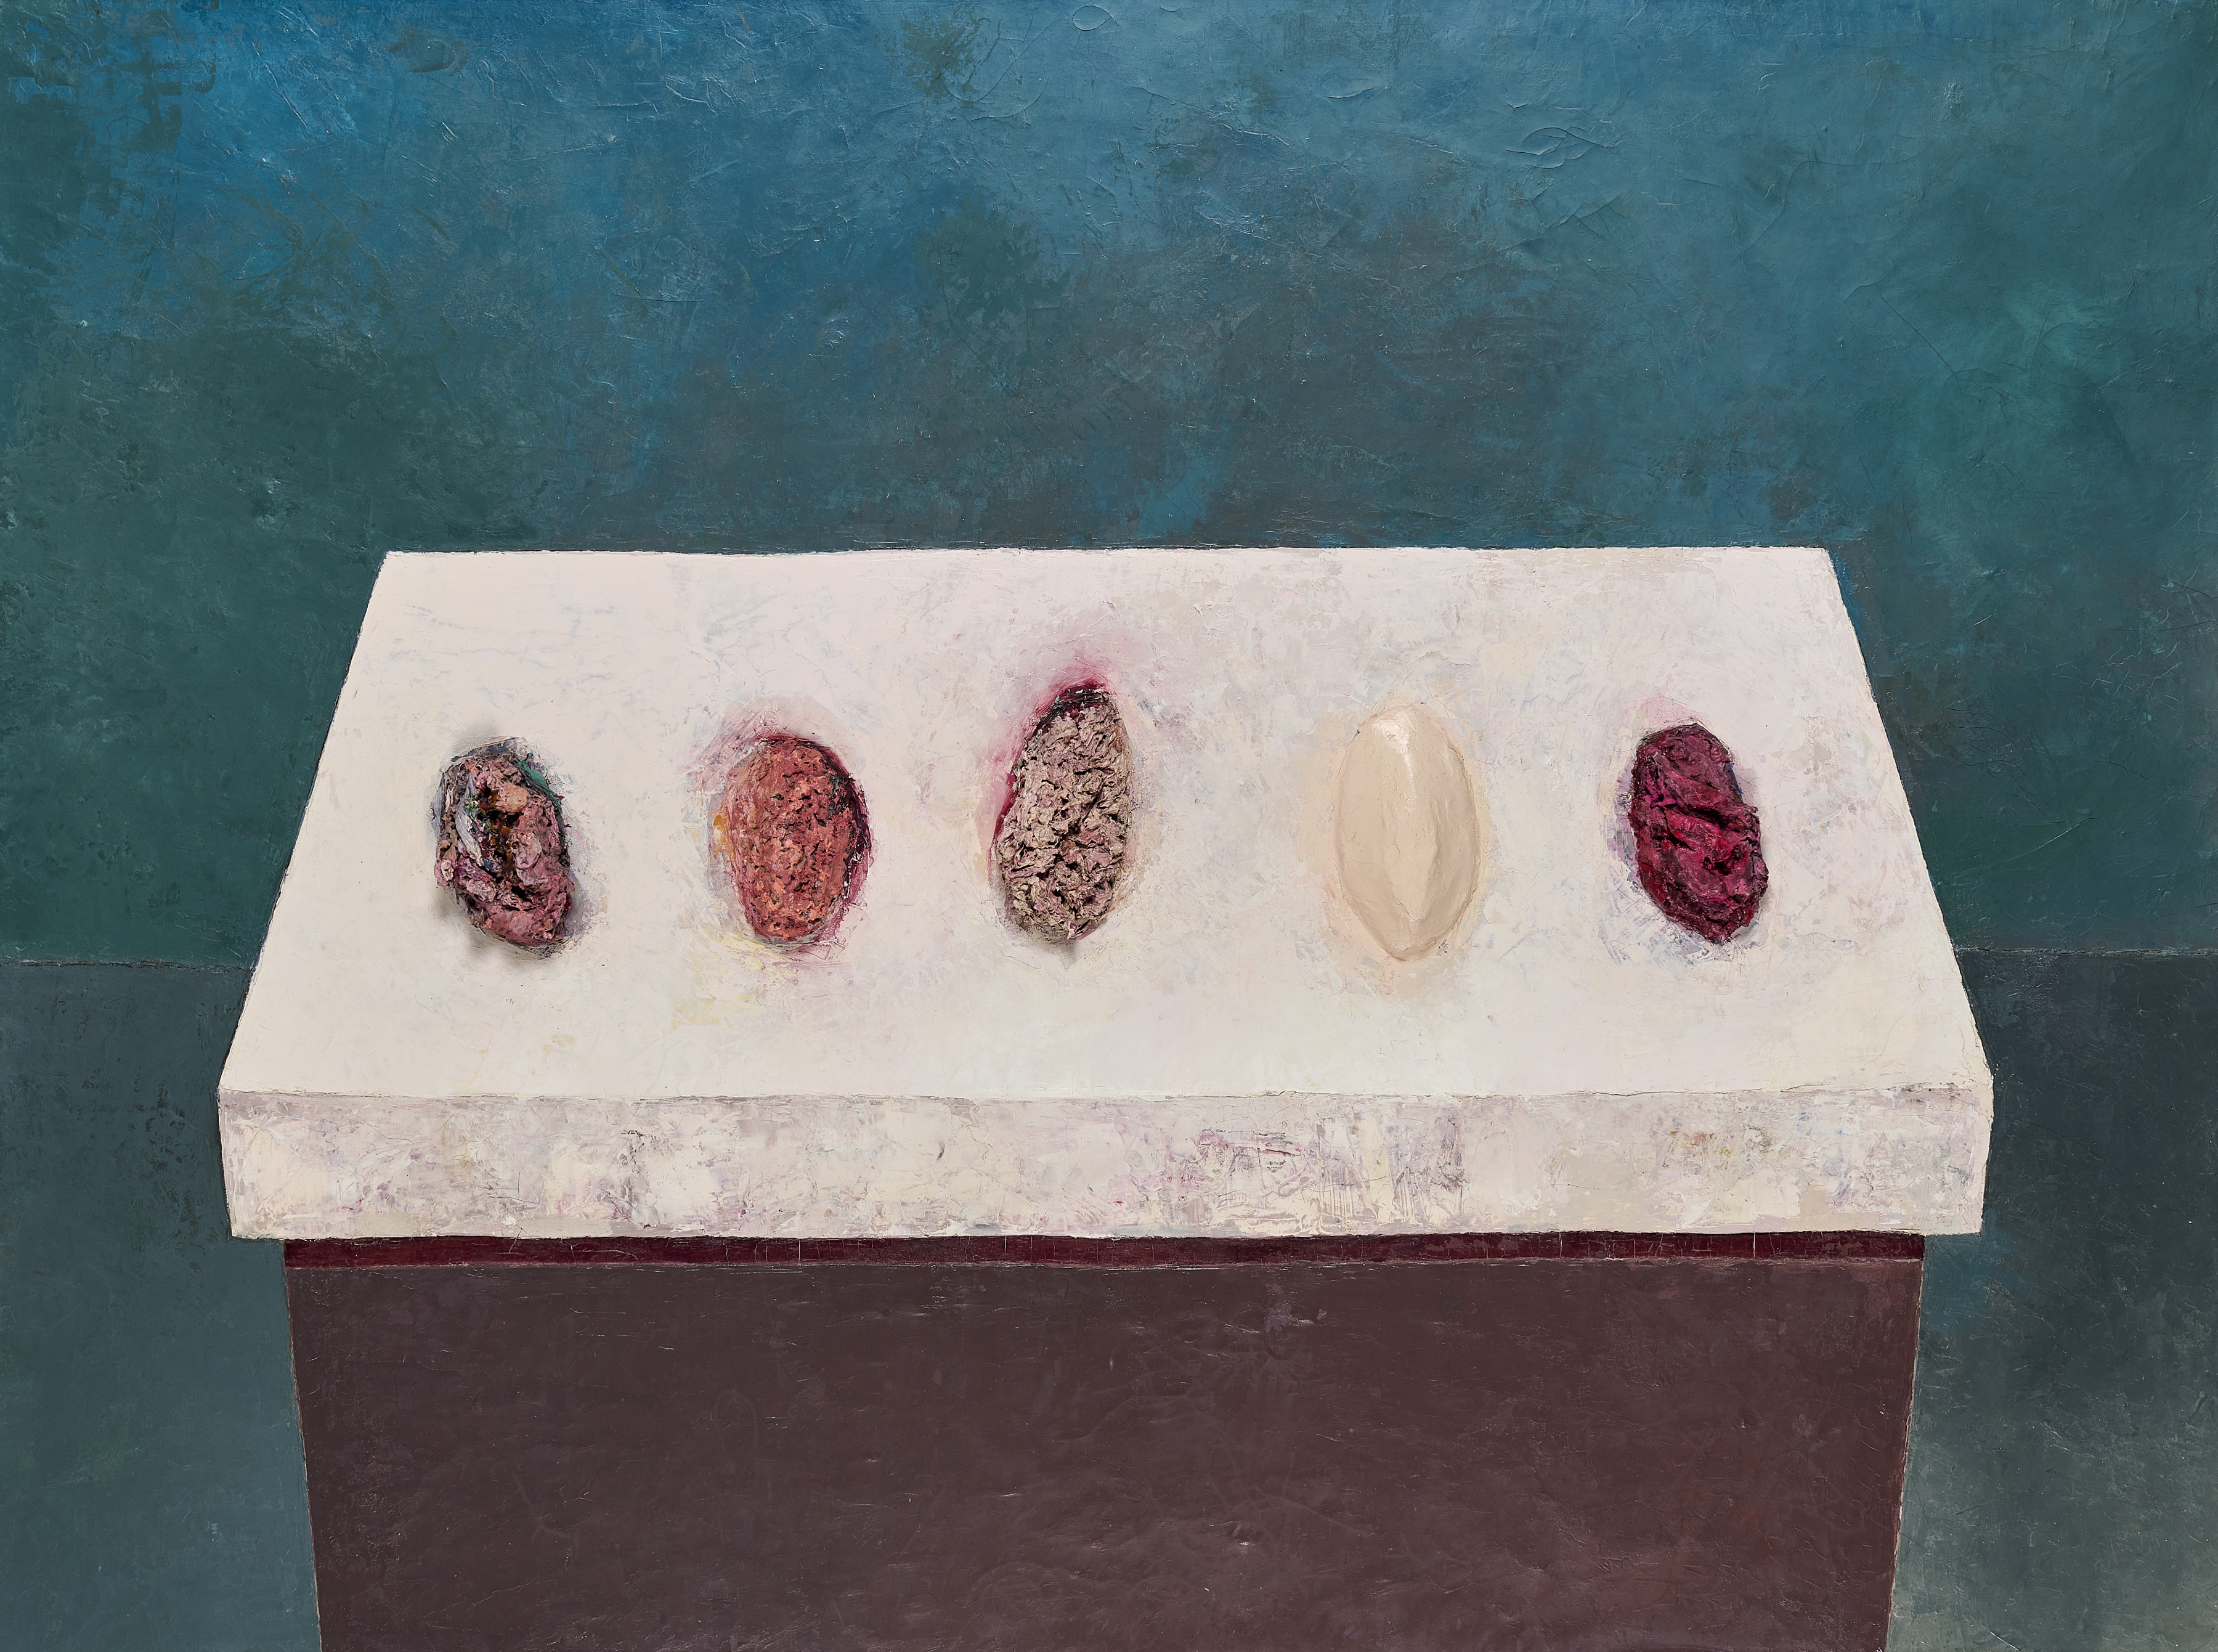 Penny Siopis

Slab, 1982

Oil On canvas mounted to board

92 x 121.5 cm&amp;nbsp;(36.2 x 47.6 in.)

Enquire